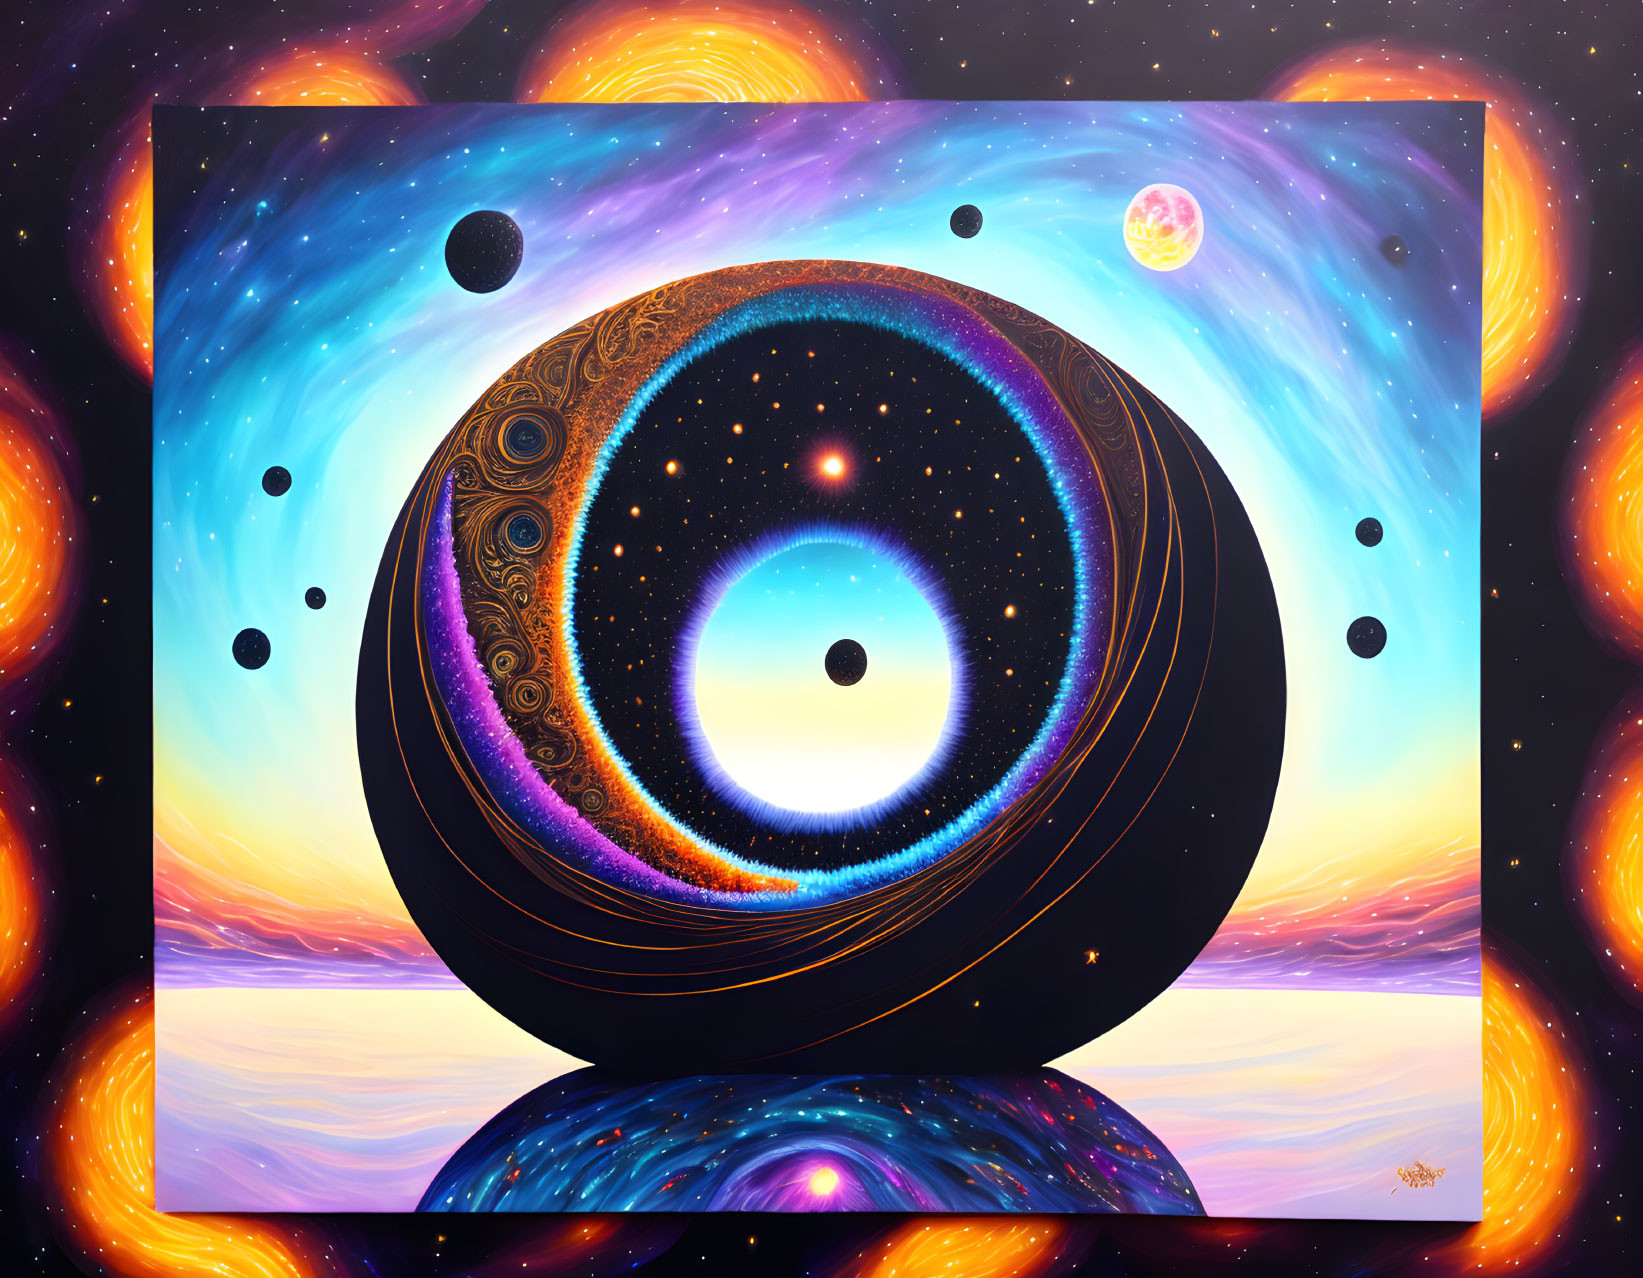 Colorful cosmic painting with infinity symbol and celestial bodies